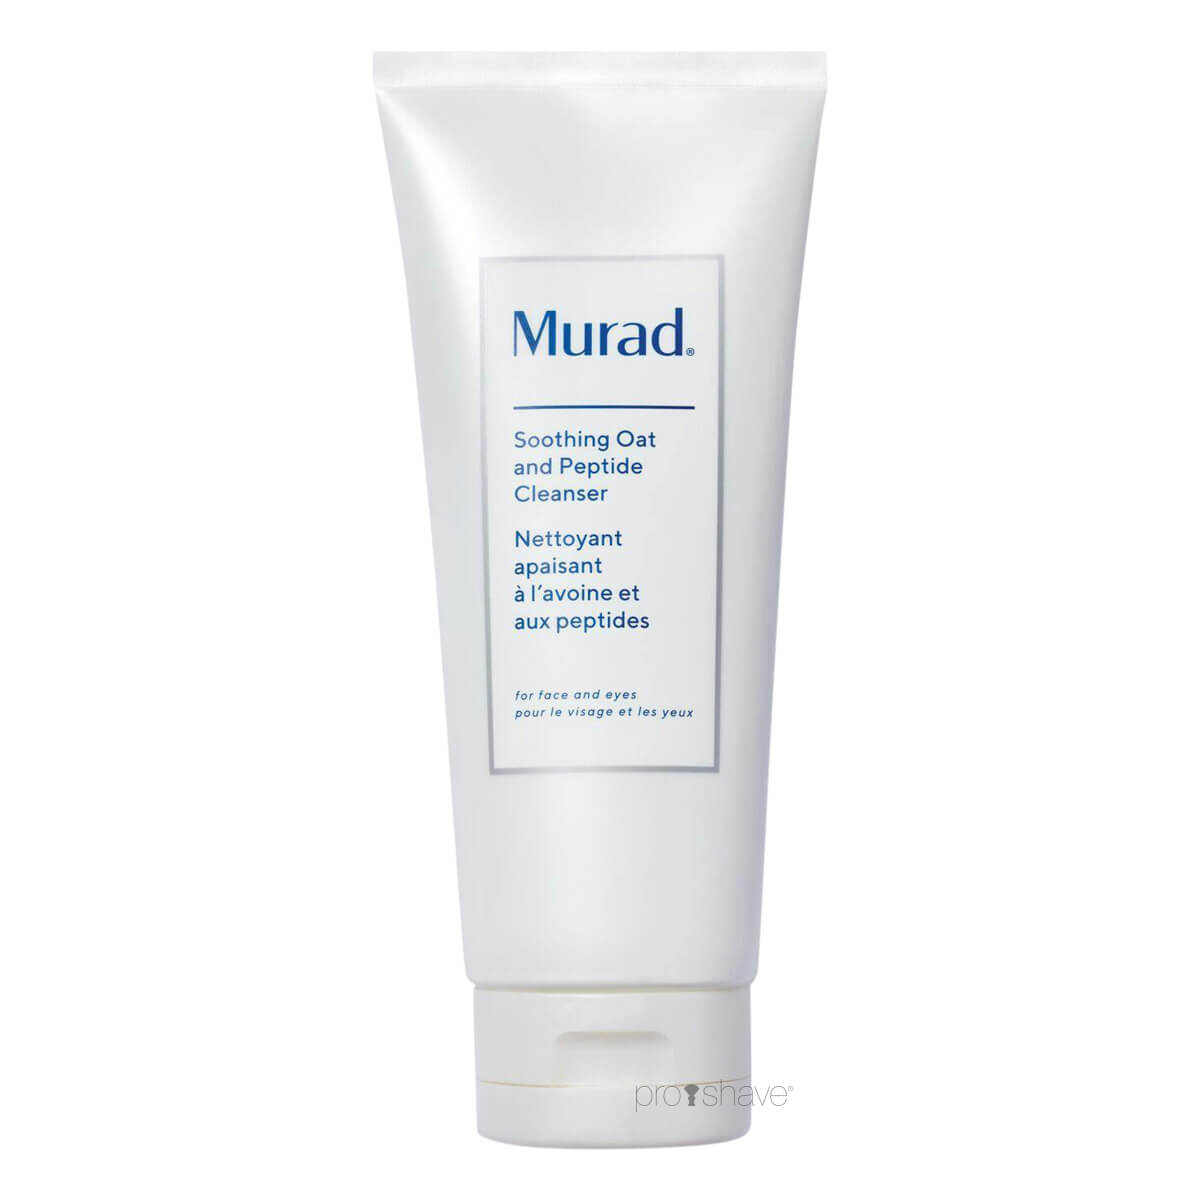 Se Murad ExaSoothe Soothing Oat and Peptide Cleanser, 200ml. hos Proshave